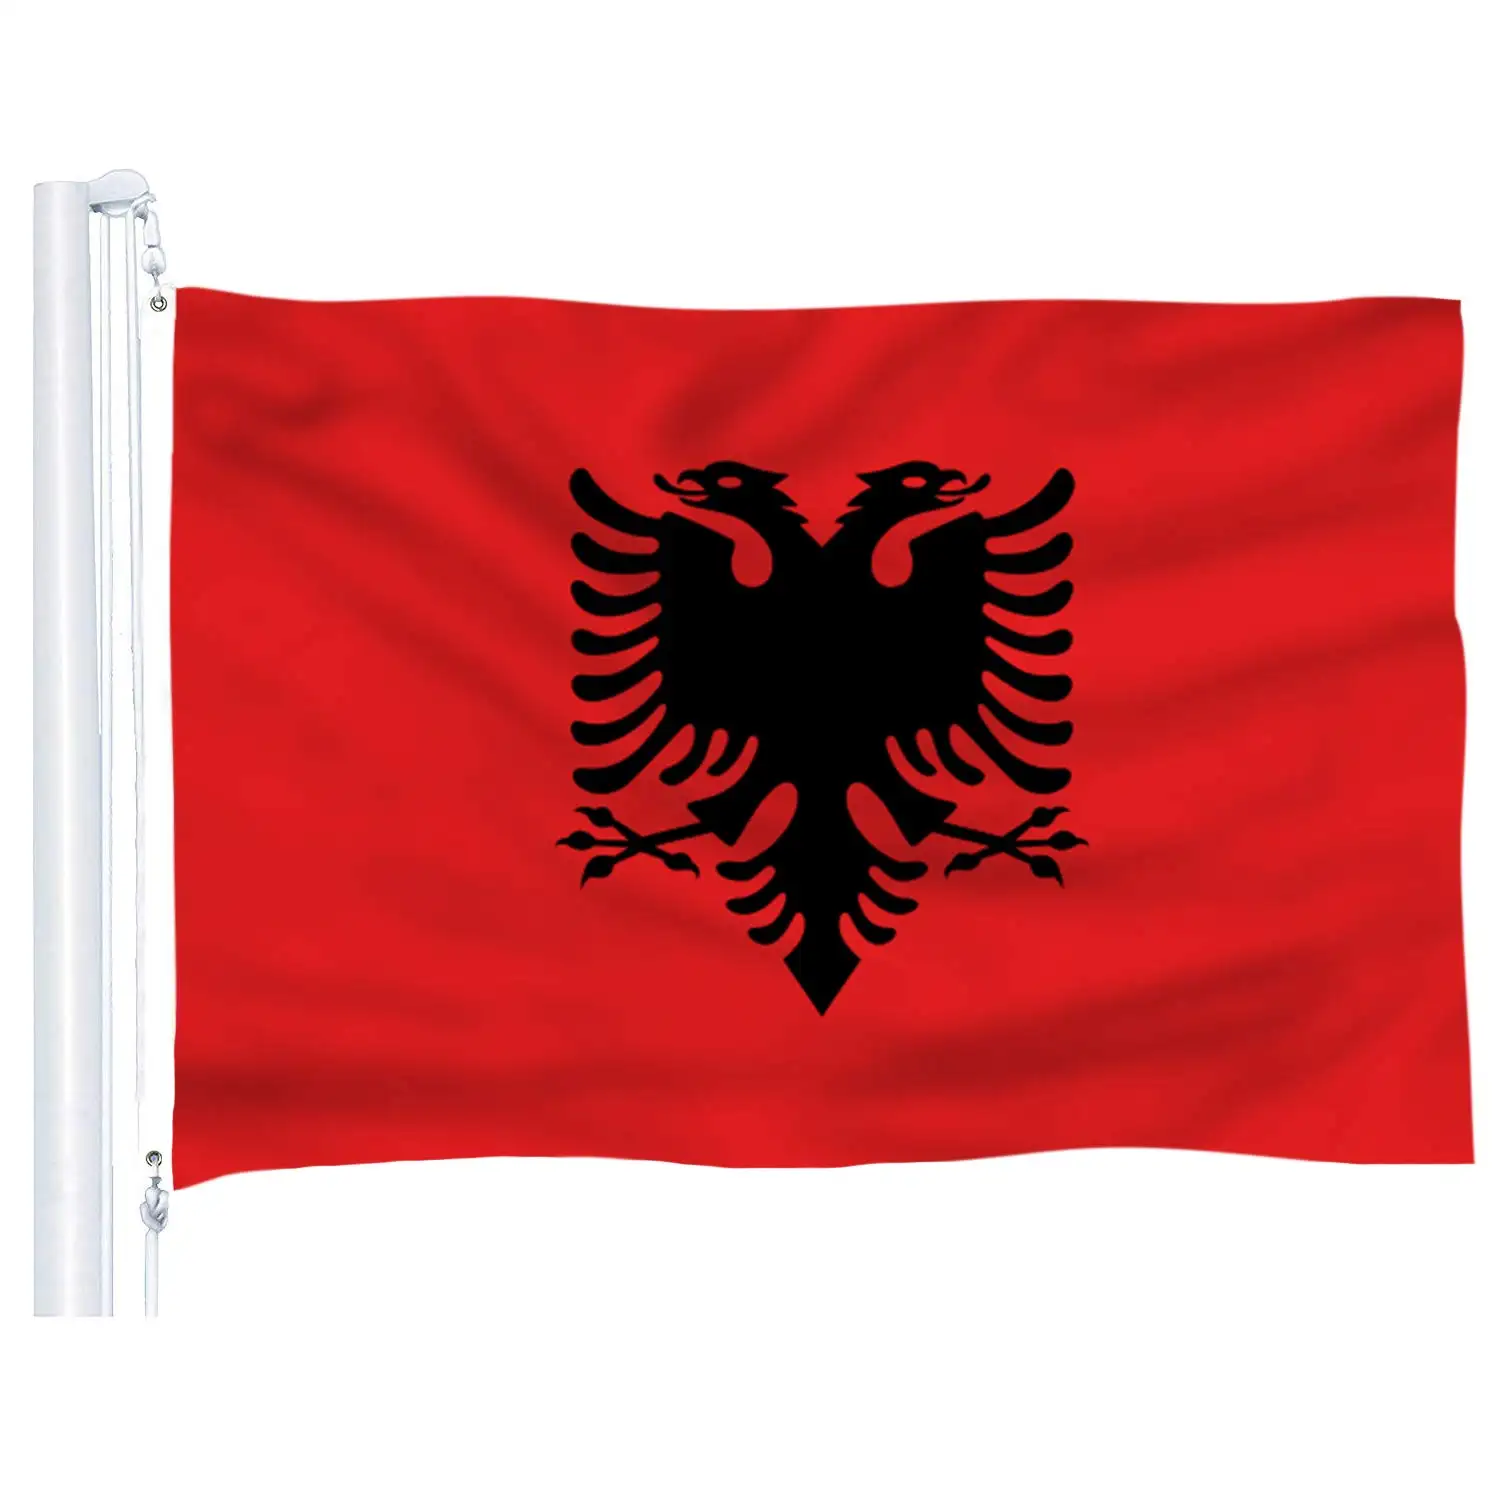 Wholesale New 3x5 FT Republic of Albania Albanian Flag Polyester Printed Banner